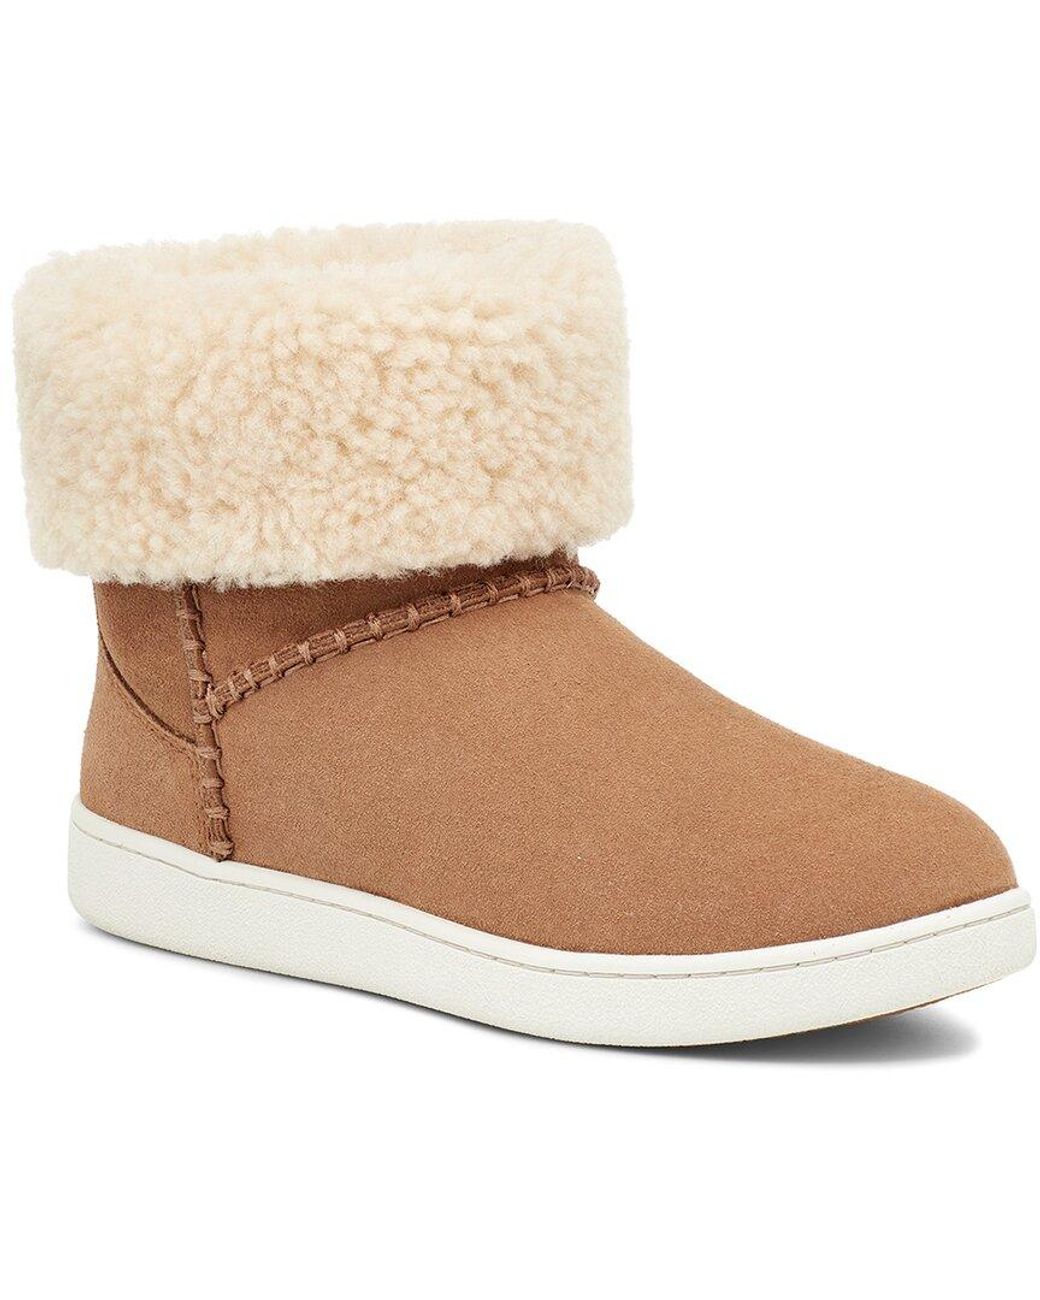 UGG Mika Classic Suede Sneaker Boot in Natural | Lyst